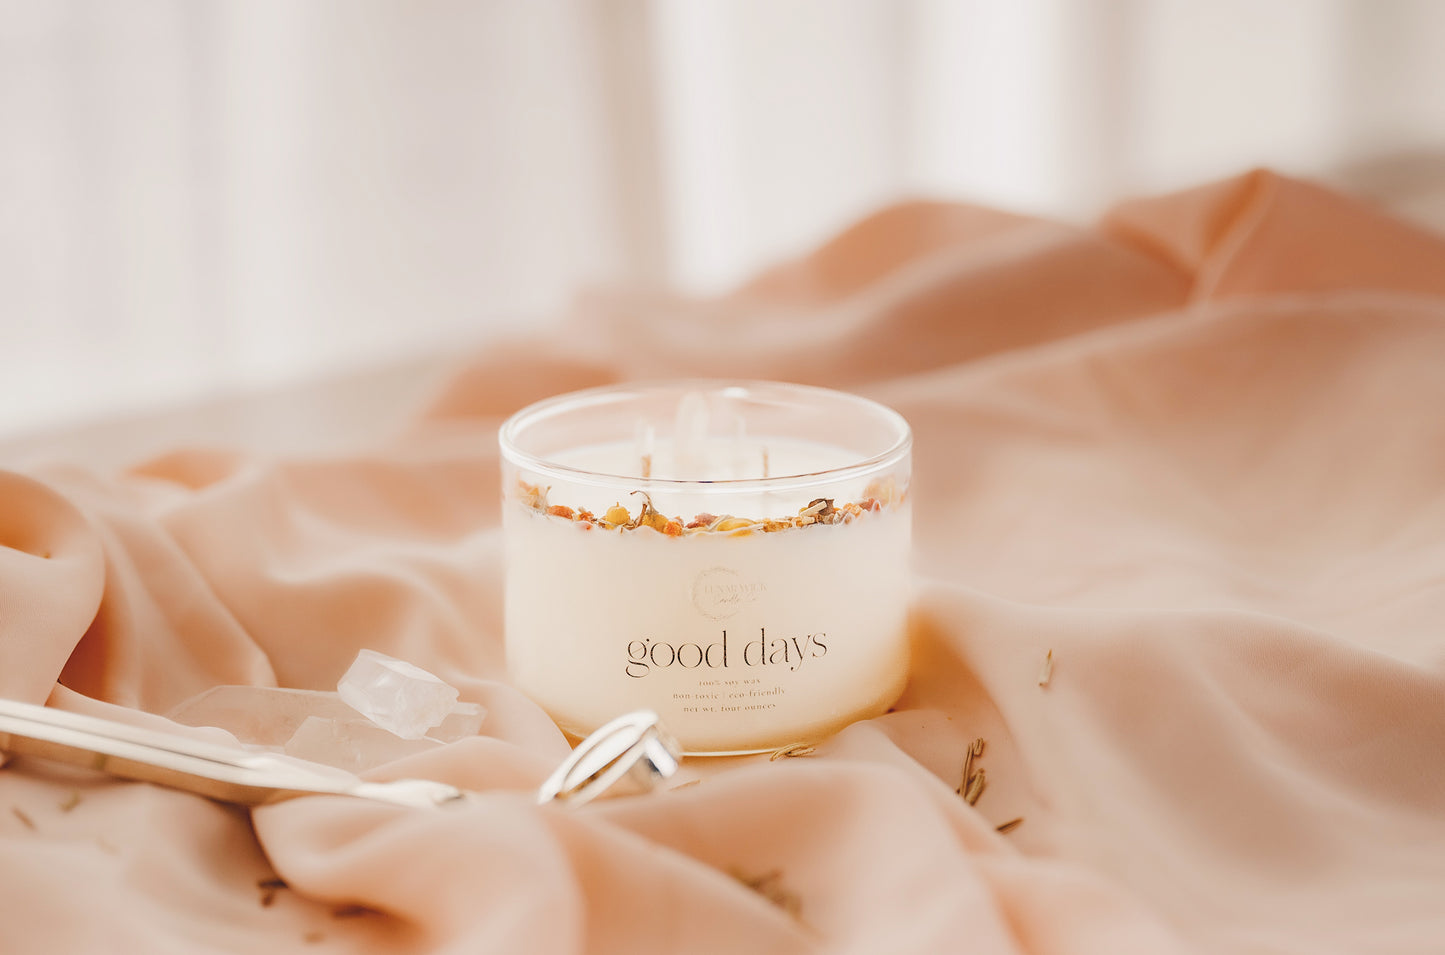 Find amazing products in Candles' today